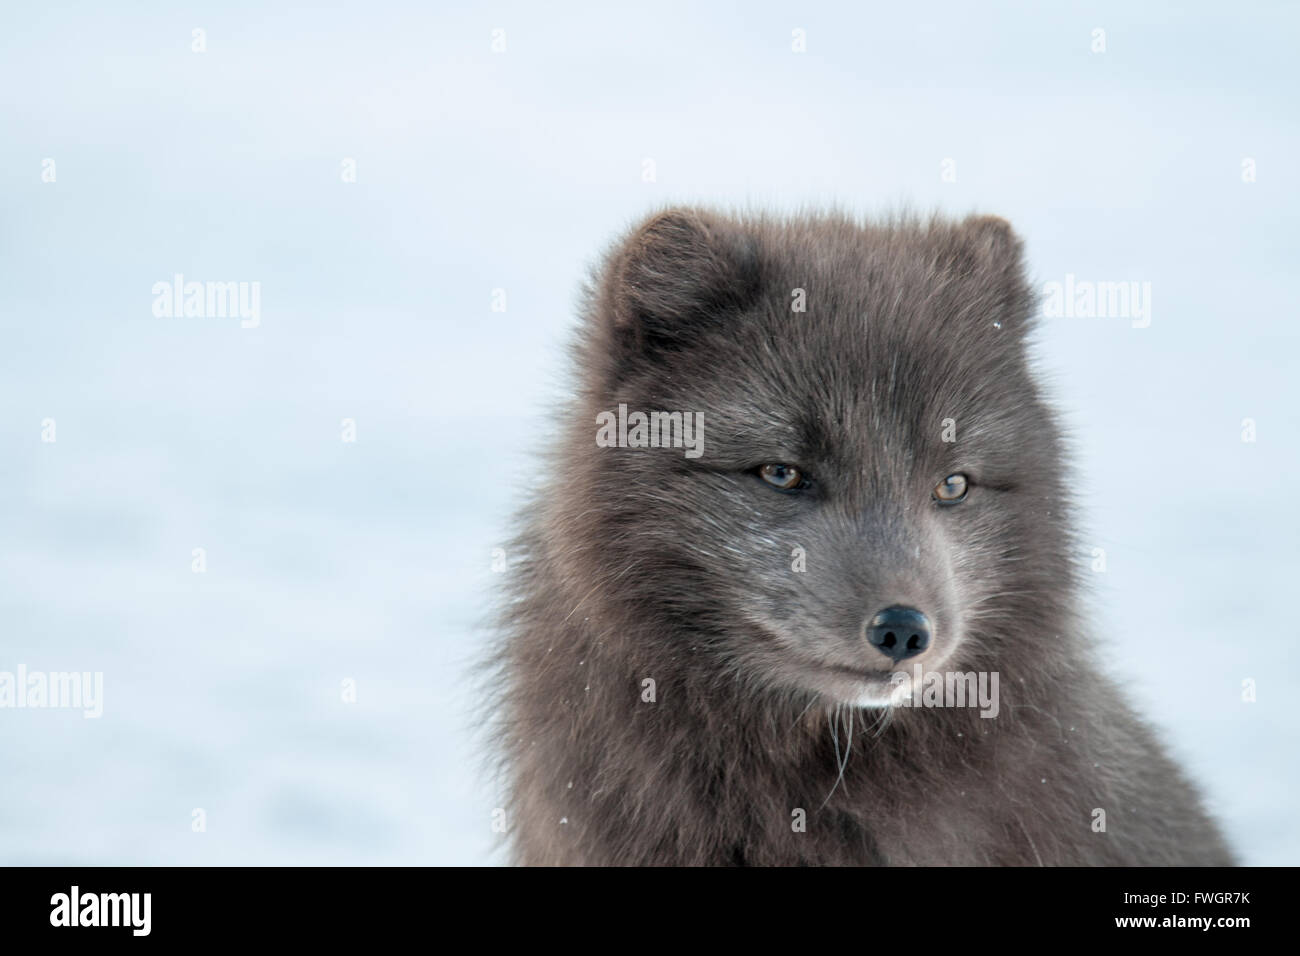 Close up head shot of Arctic fox (alopex lagopus) surrounded by snow Stock Photo